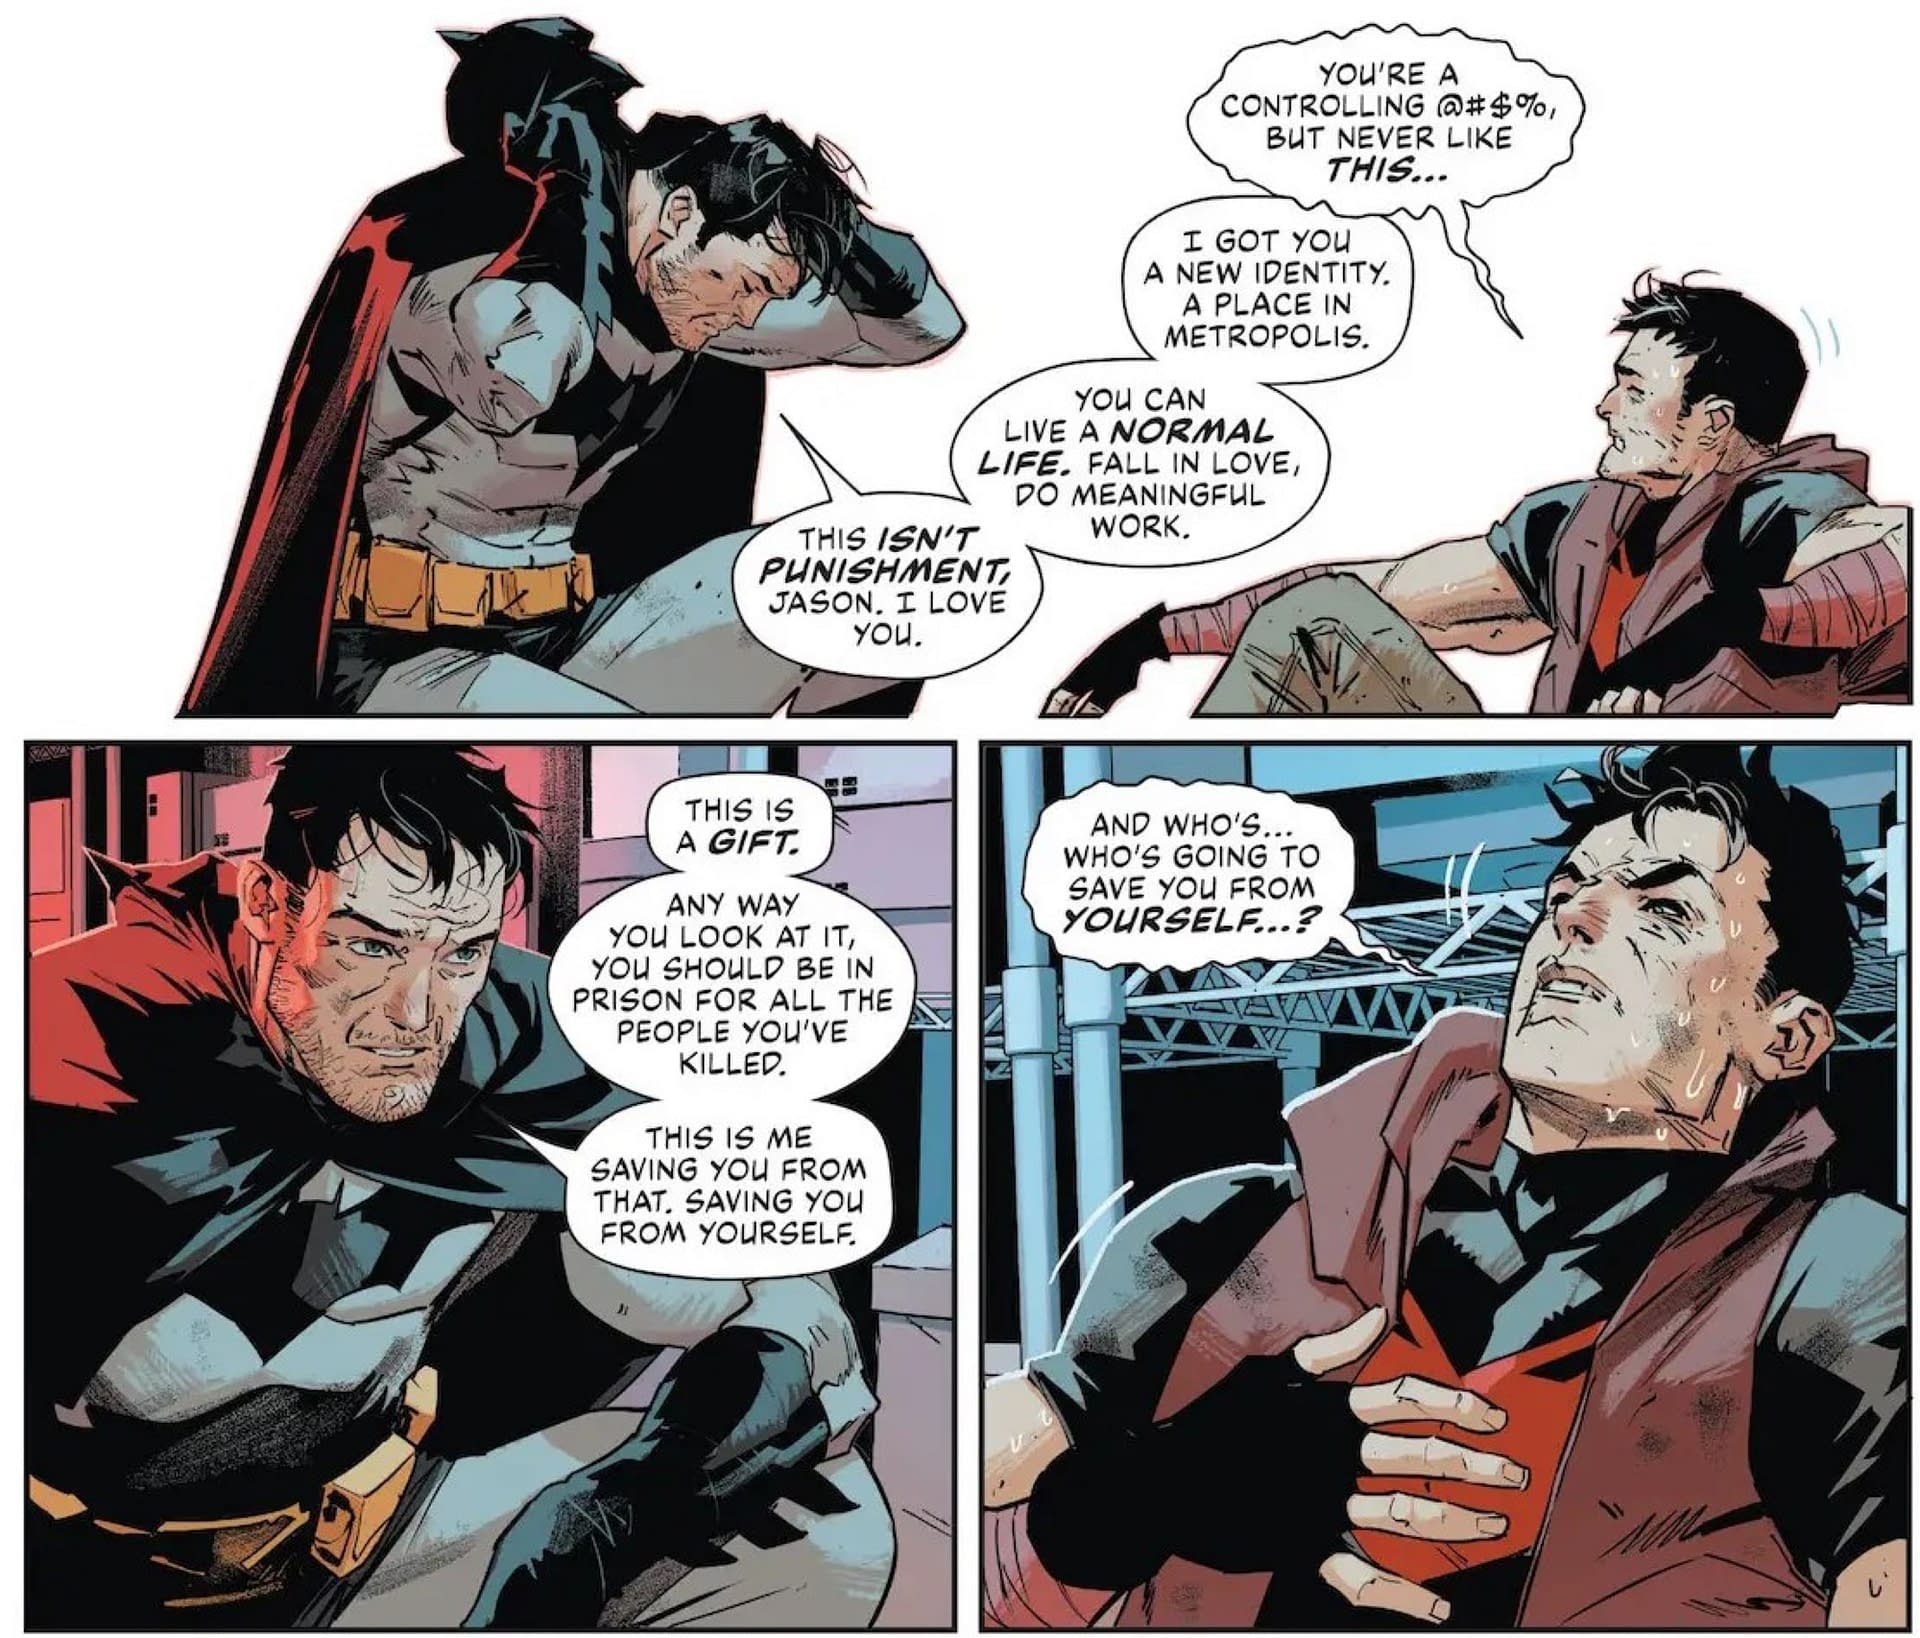 Will Batman Do to the Joker What He Does to Jason Todd in Batman #138?